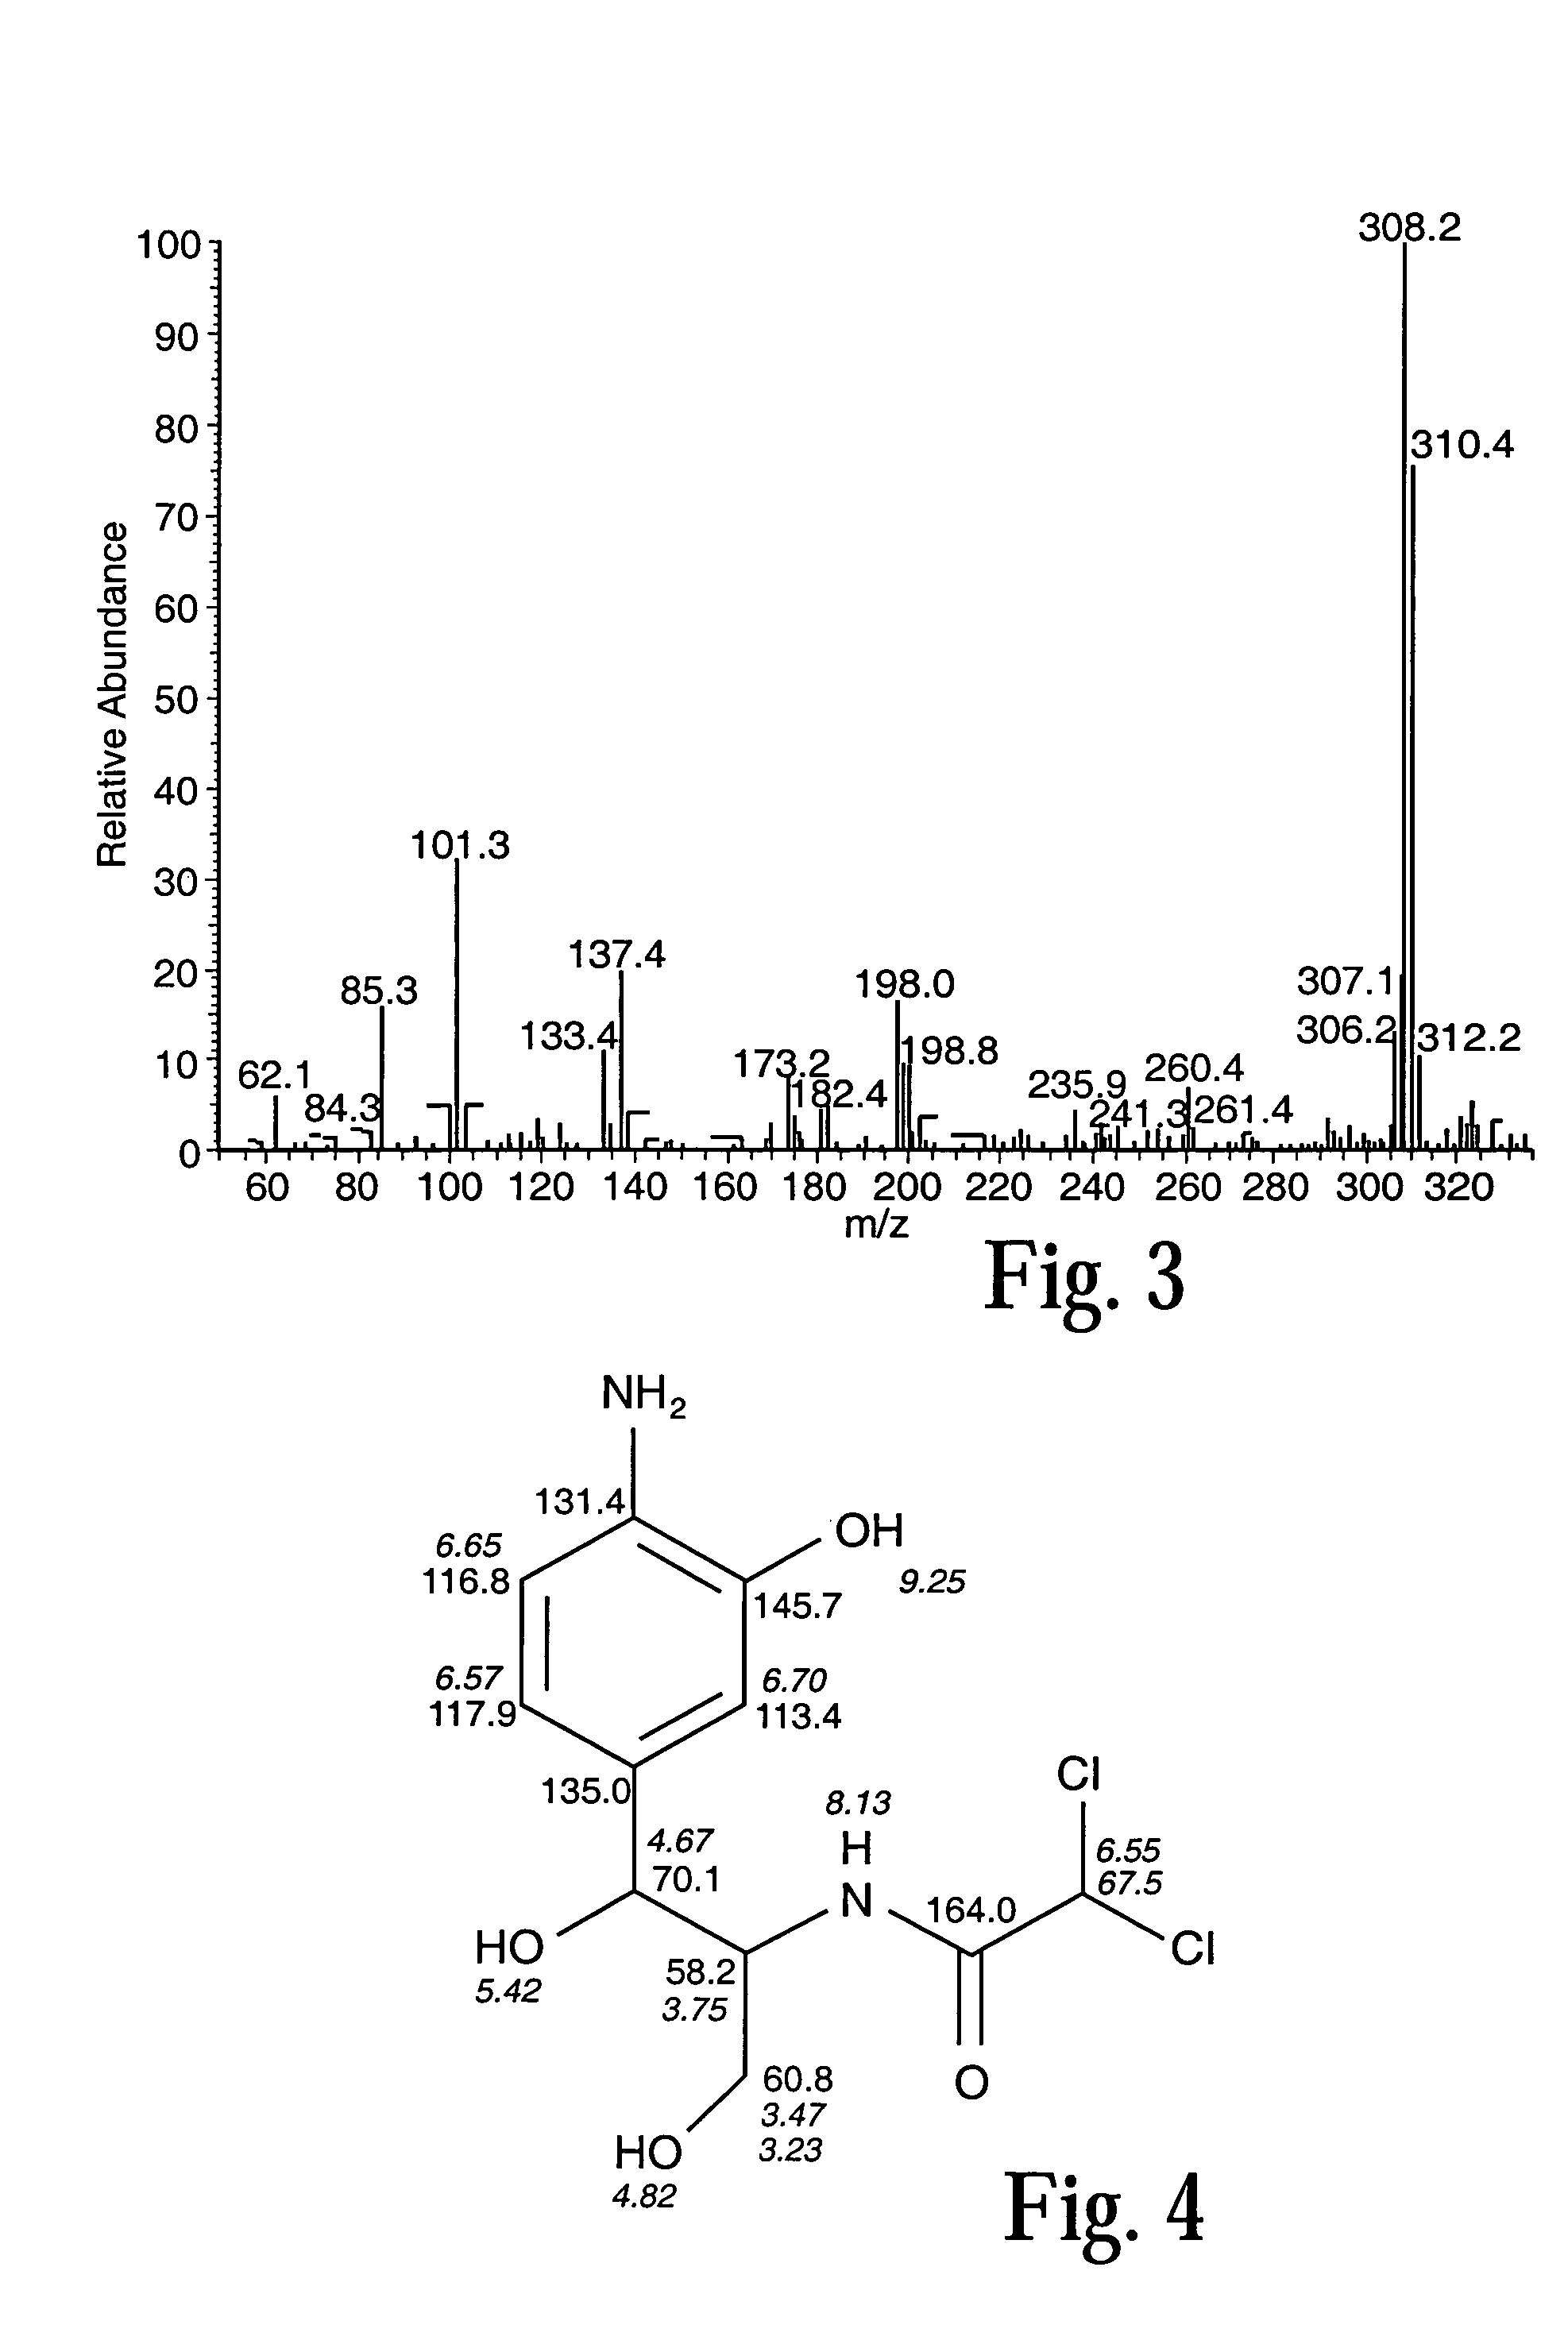 Biocatalytic process for the production of ortho-aminophenols from chloramphenicol and analogs